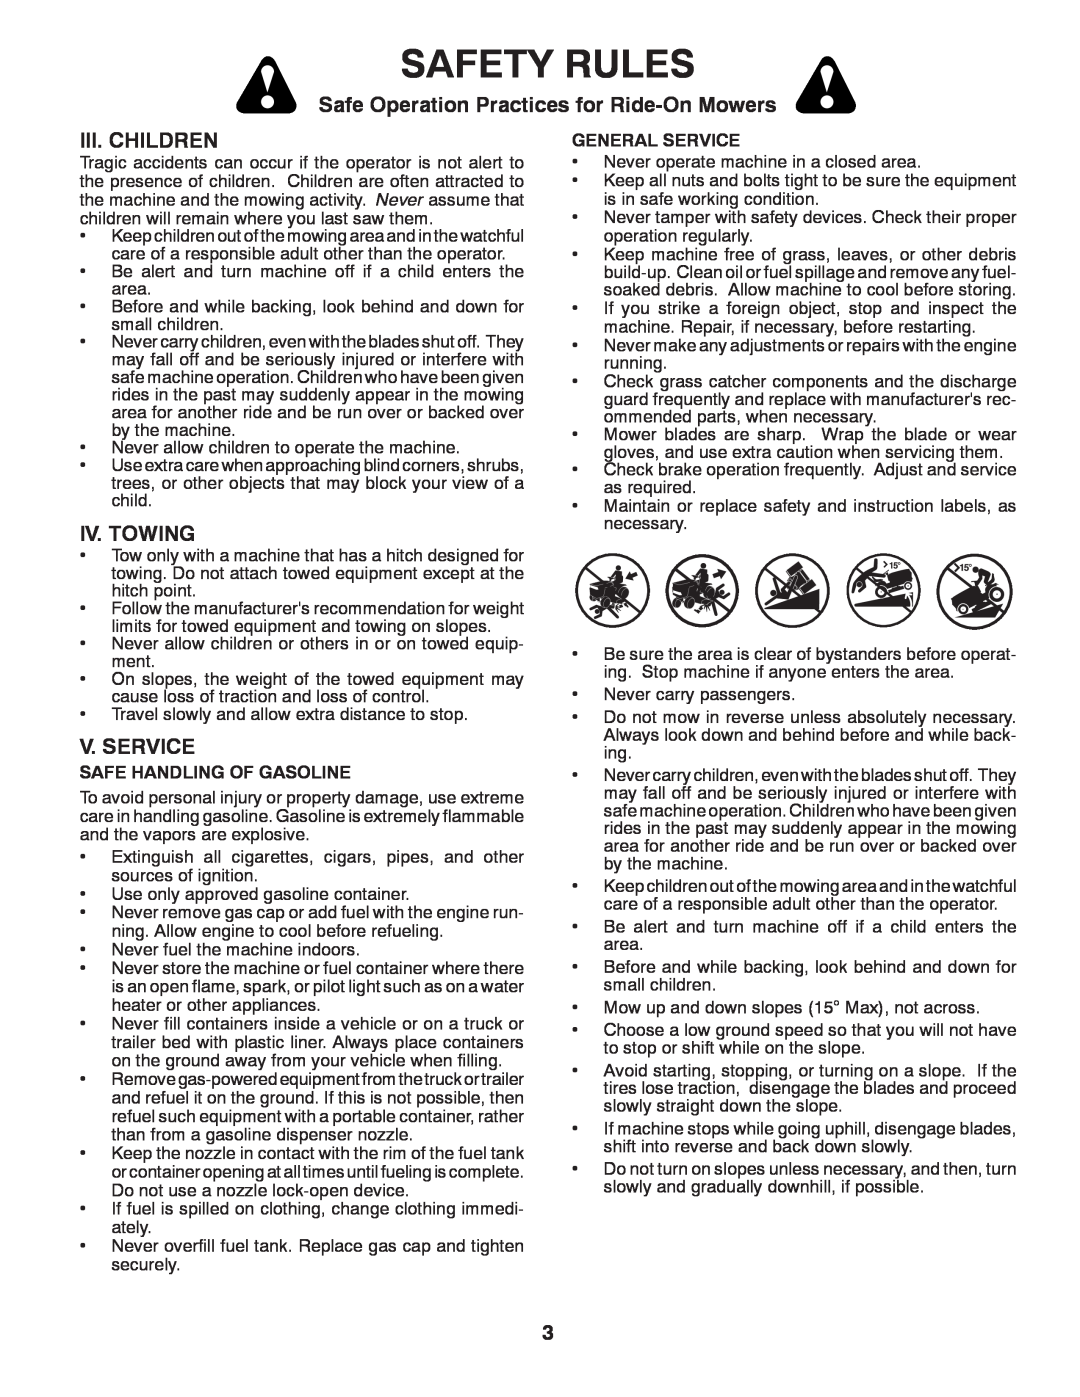 Poulan 96042003505 manual Safety Rules, Safe Operation Practices for Ride-On Mowers, Iii. Children, Iv. Towing, V. Service 